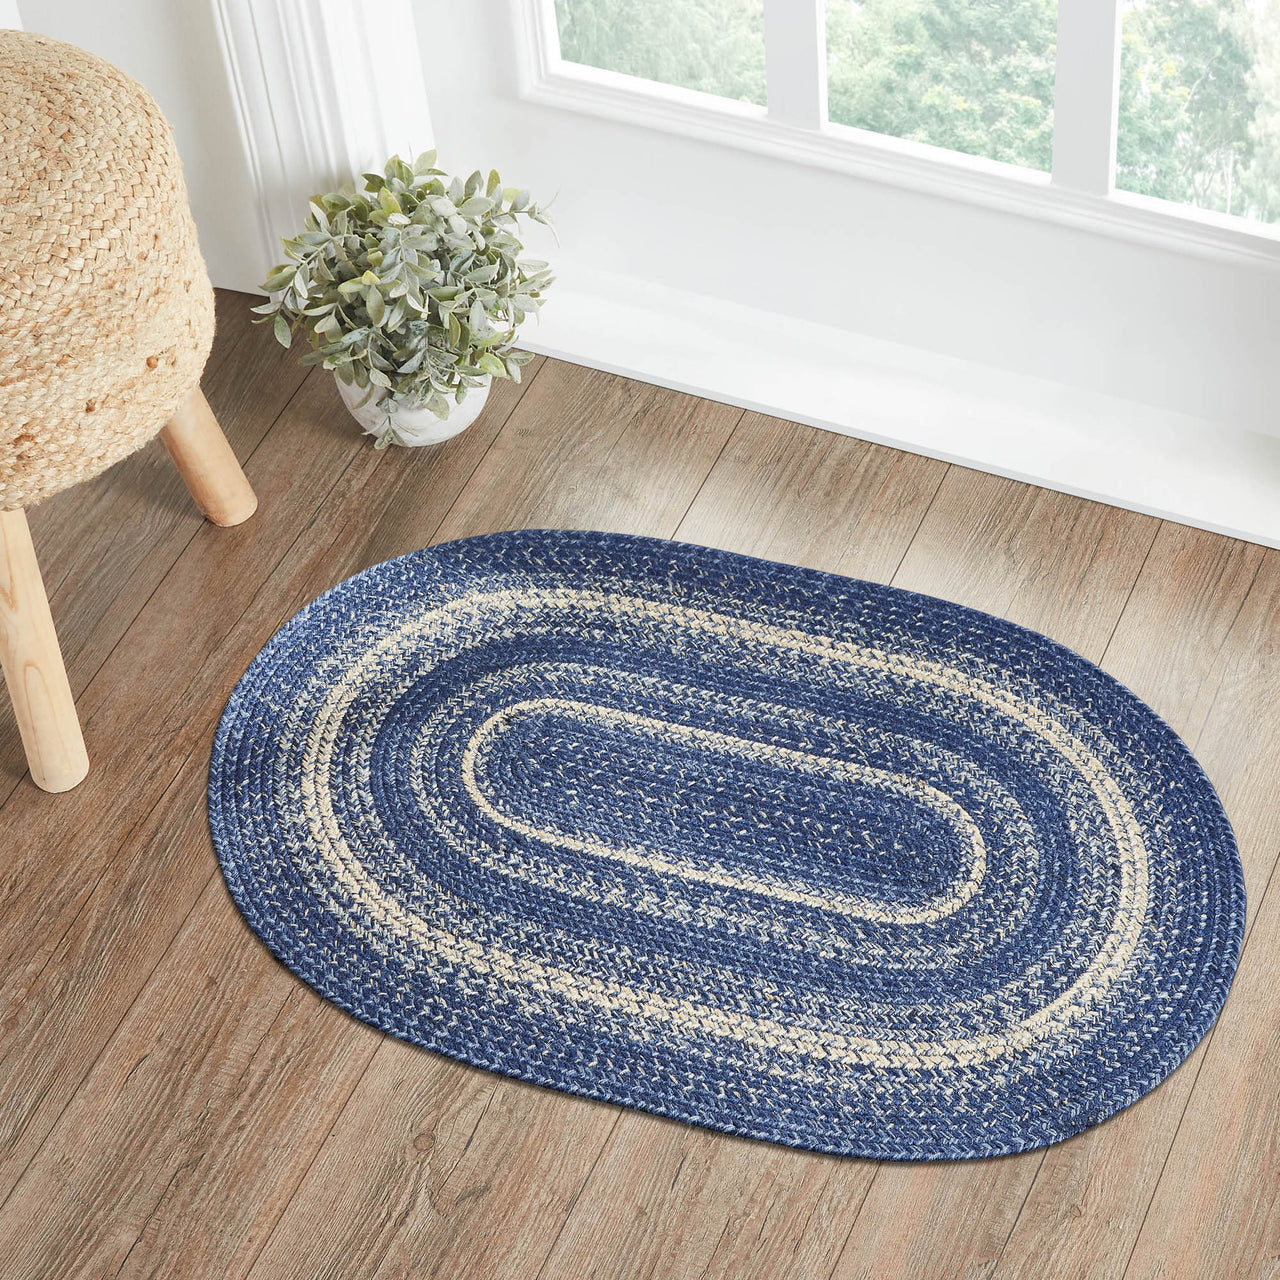 Great Falls Jute Braided Rug Oval with Rug Pad 2'x3' VHC Brands